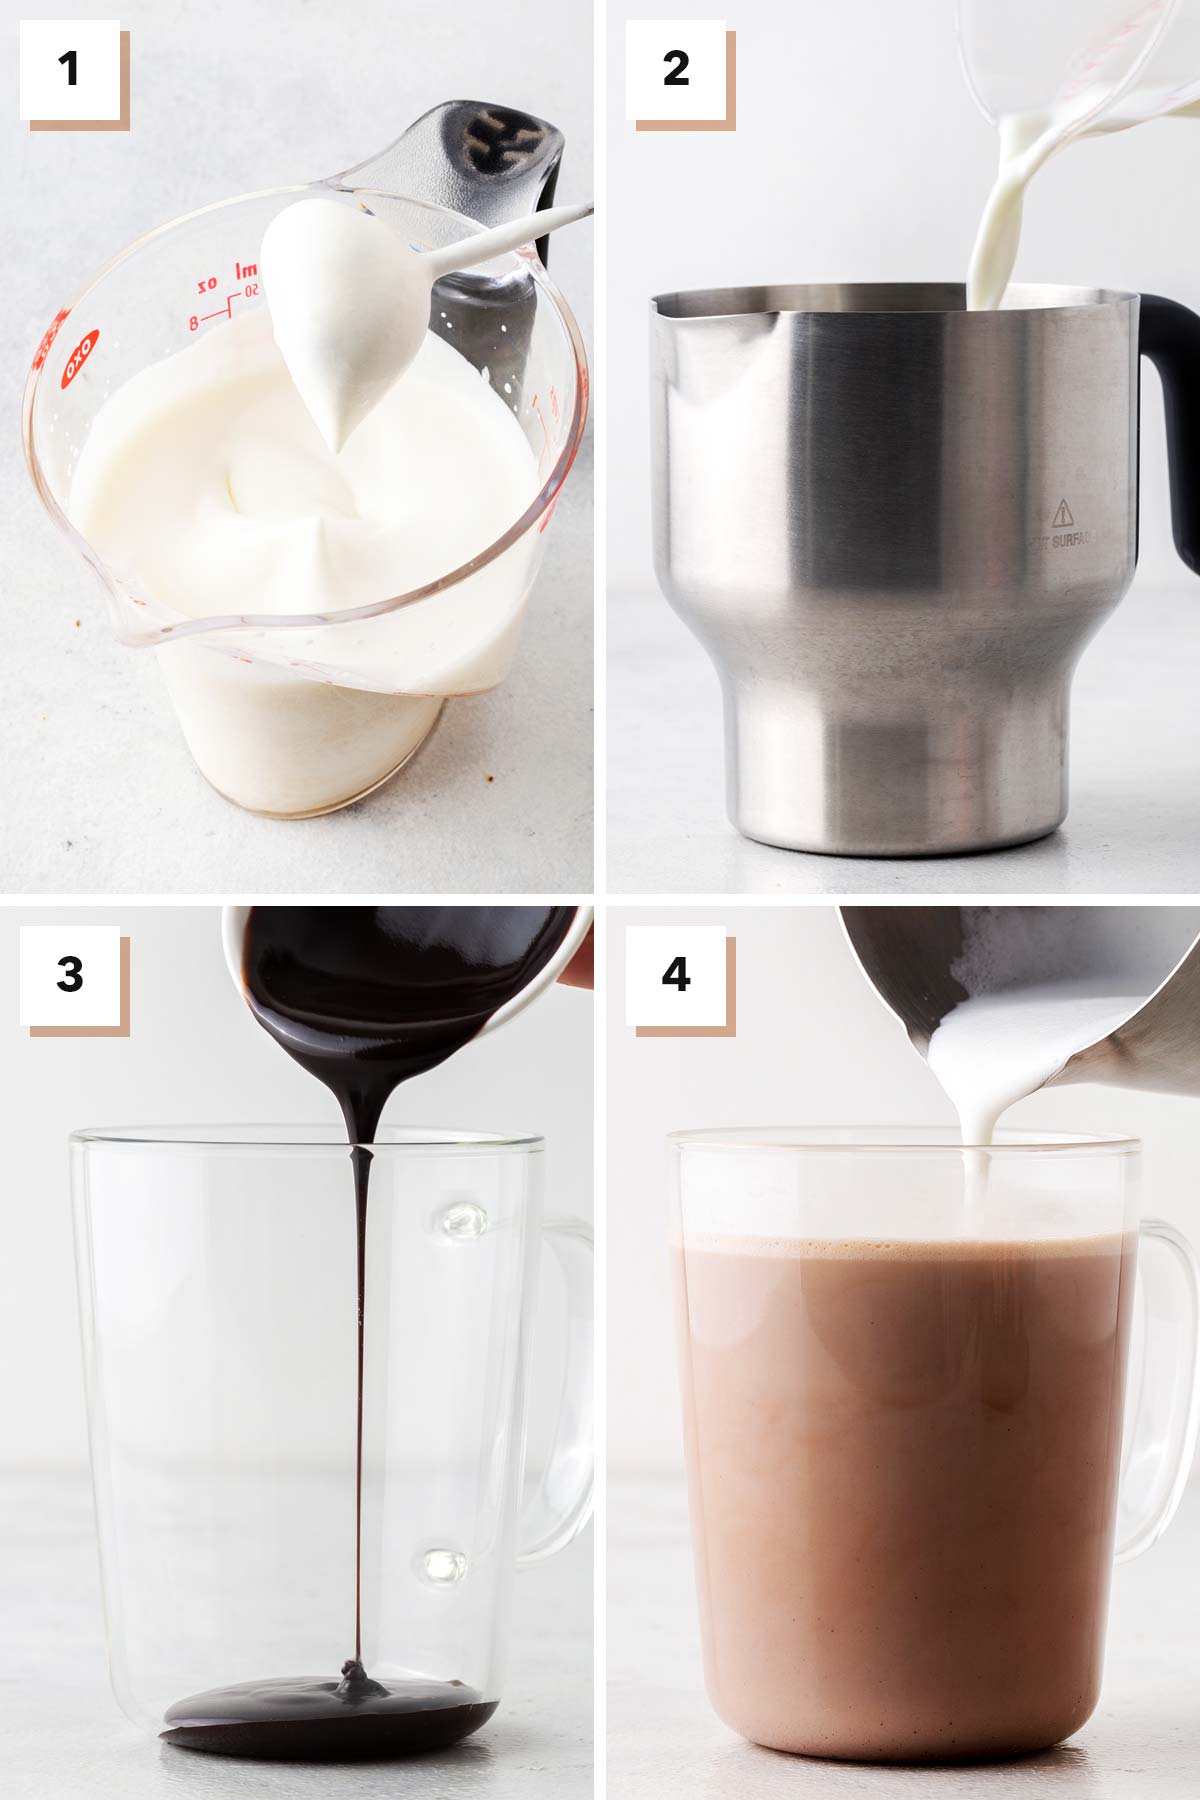 4 photos showing steps to make a peppermint hot chocolate.